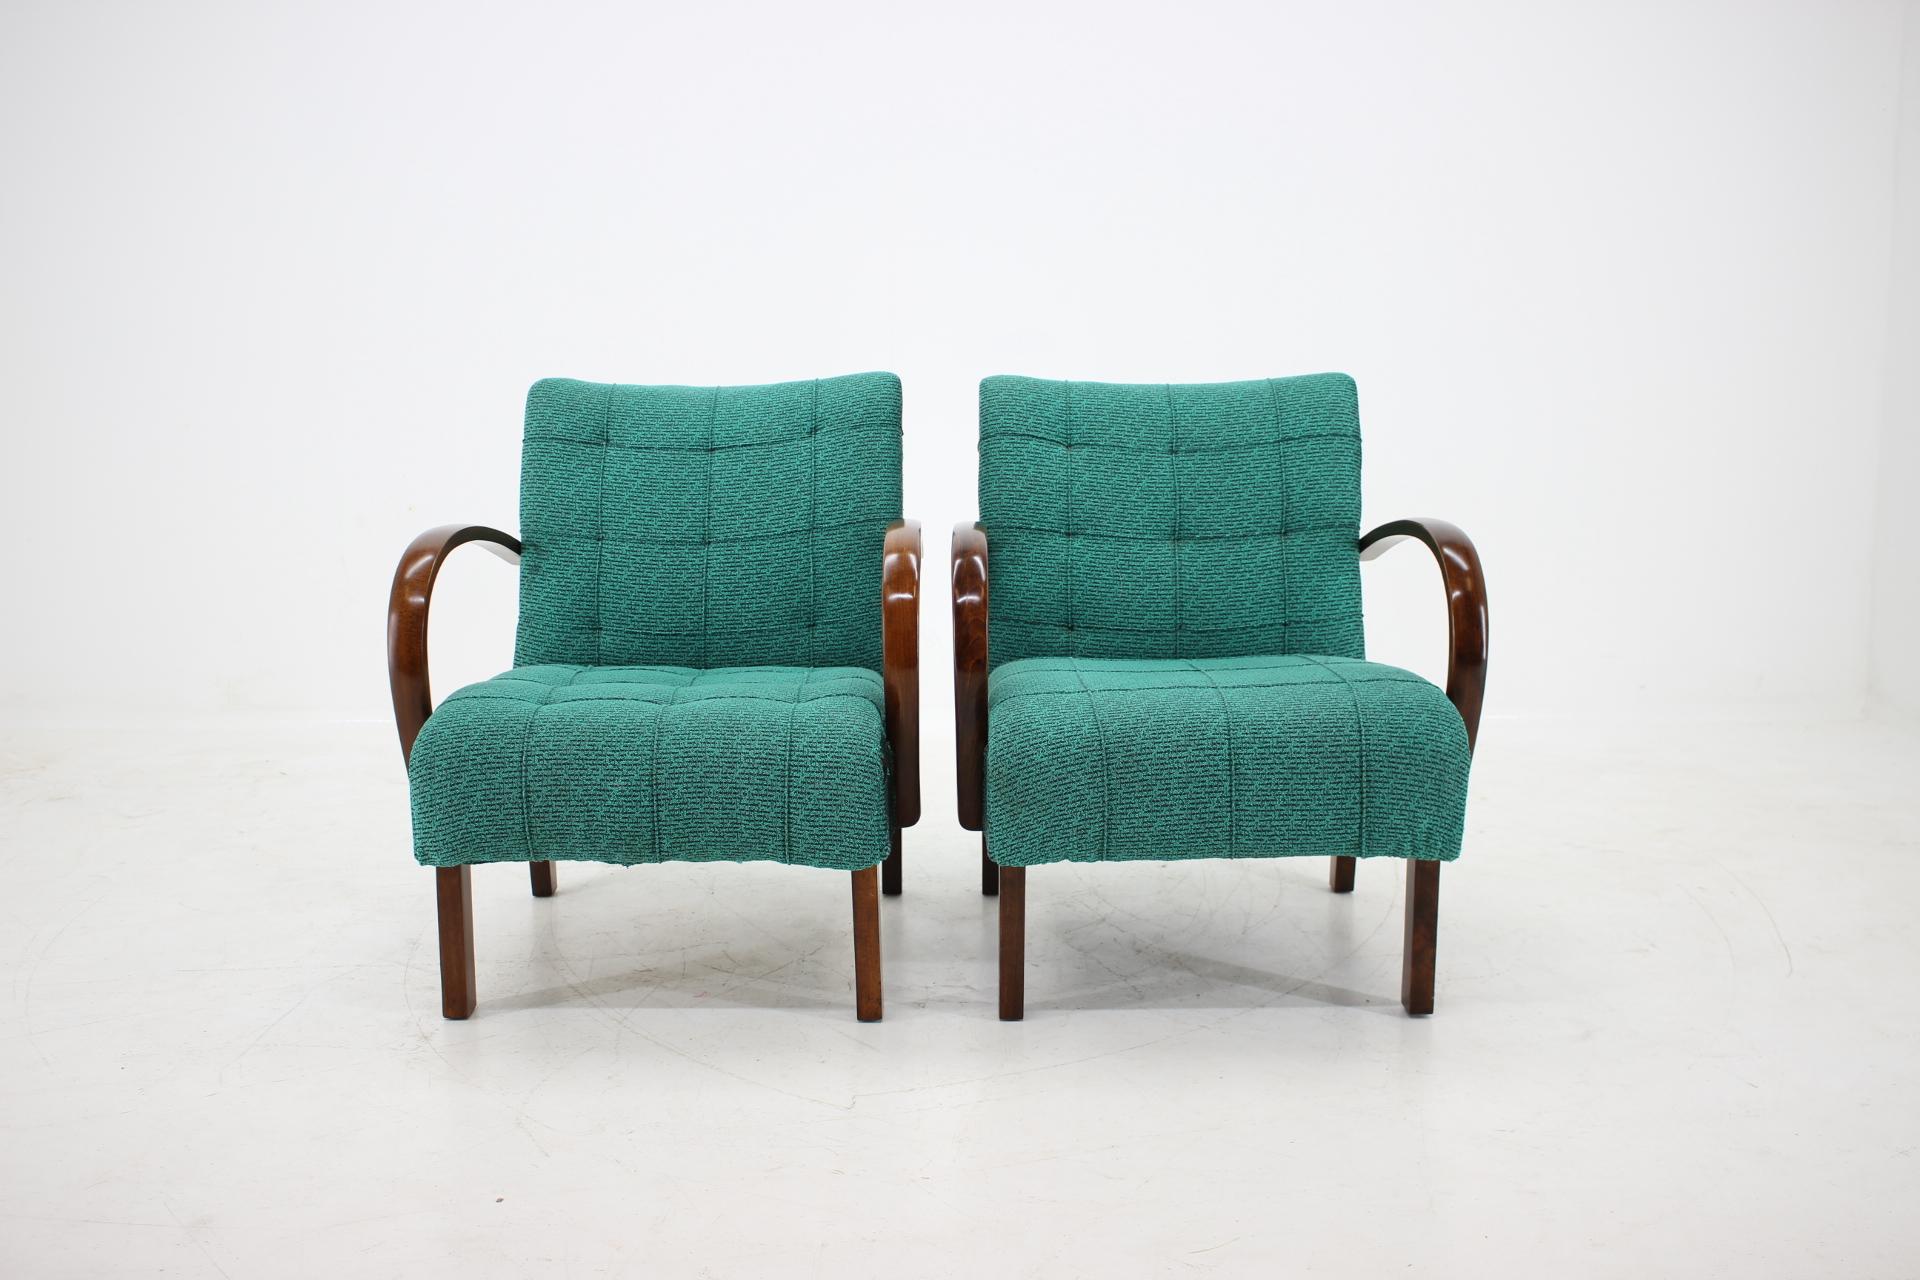 - Made in Czechoslovakia
- Made of wood, fabric
- Armchairs have label Thonet
- Original upholstery
- Wooden parts restored
- Cleaned upholstery
- Comfortable
- Suitable also for renovation upholstery
- Very good condition.